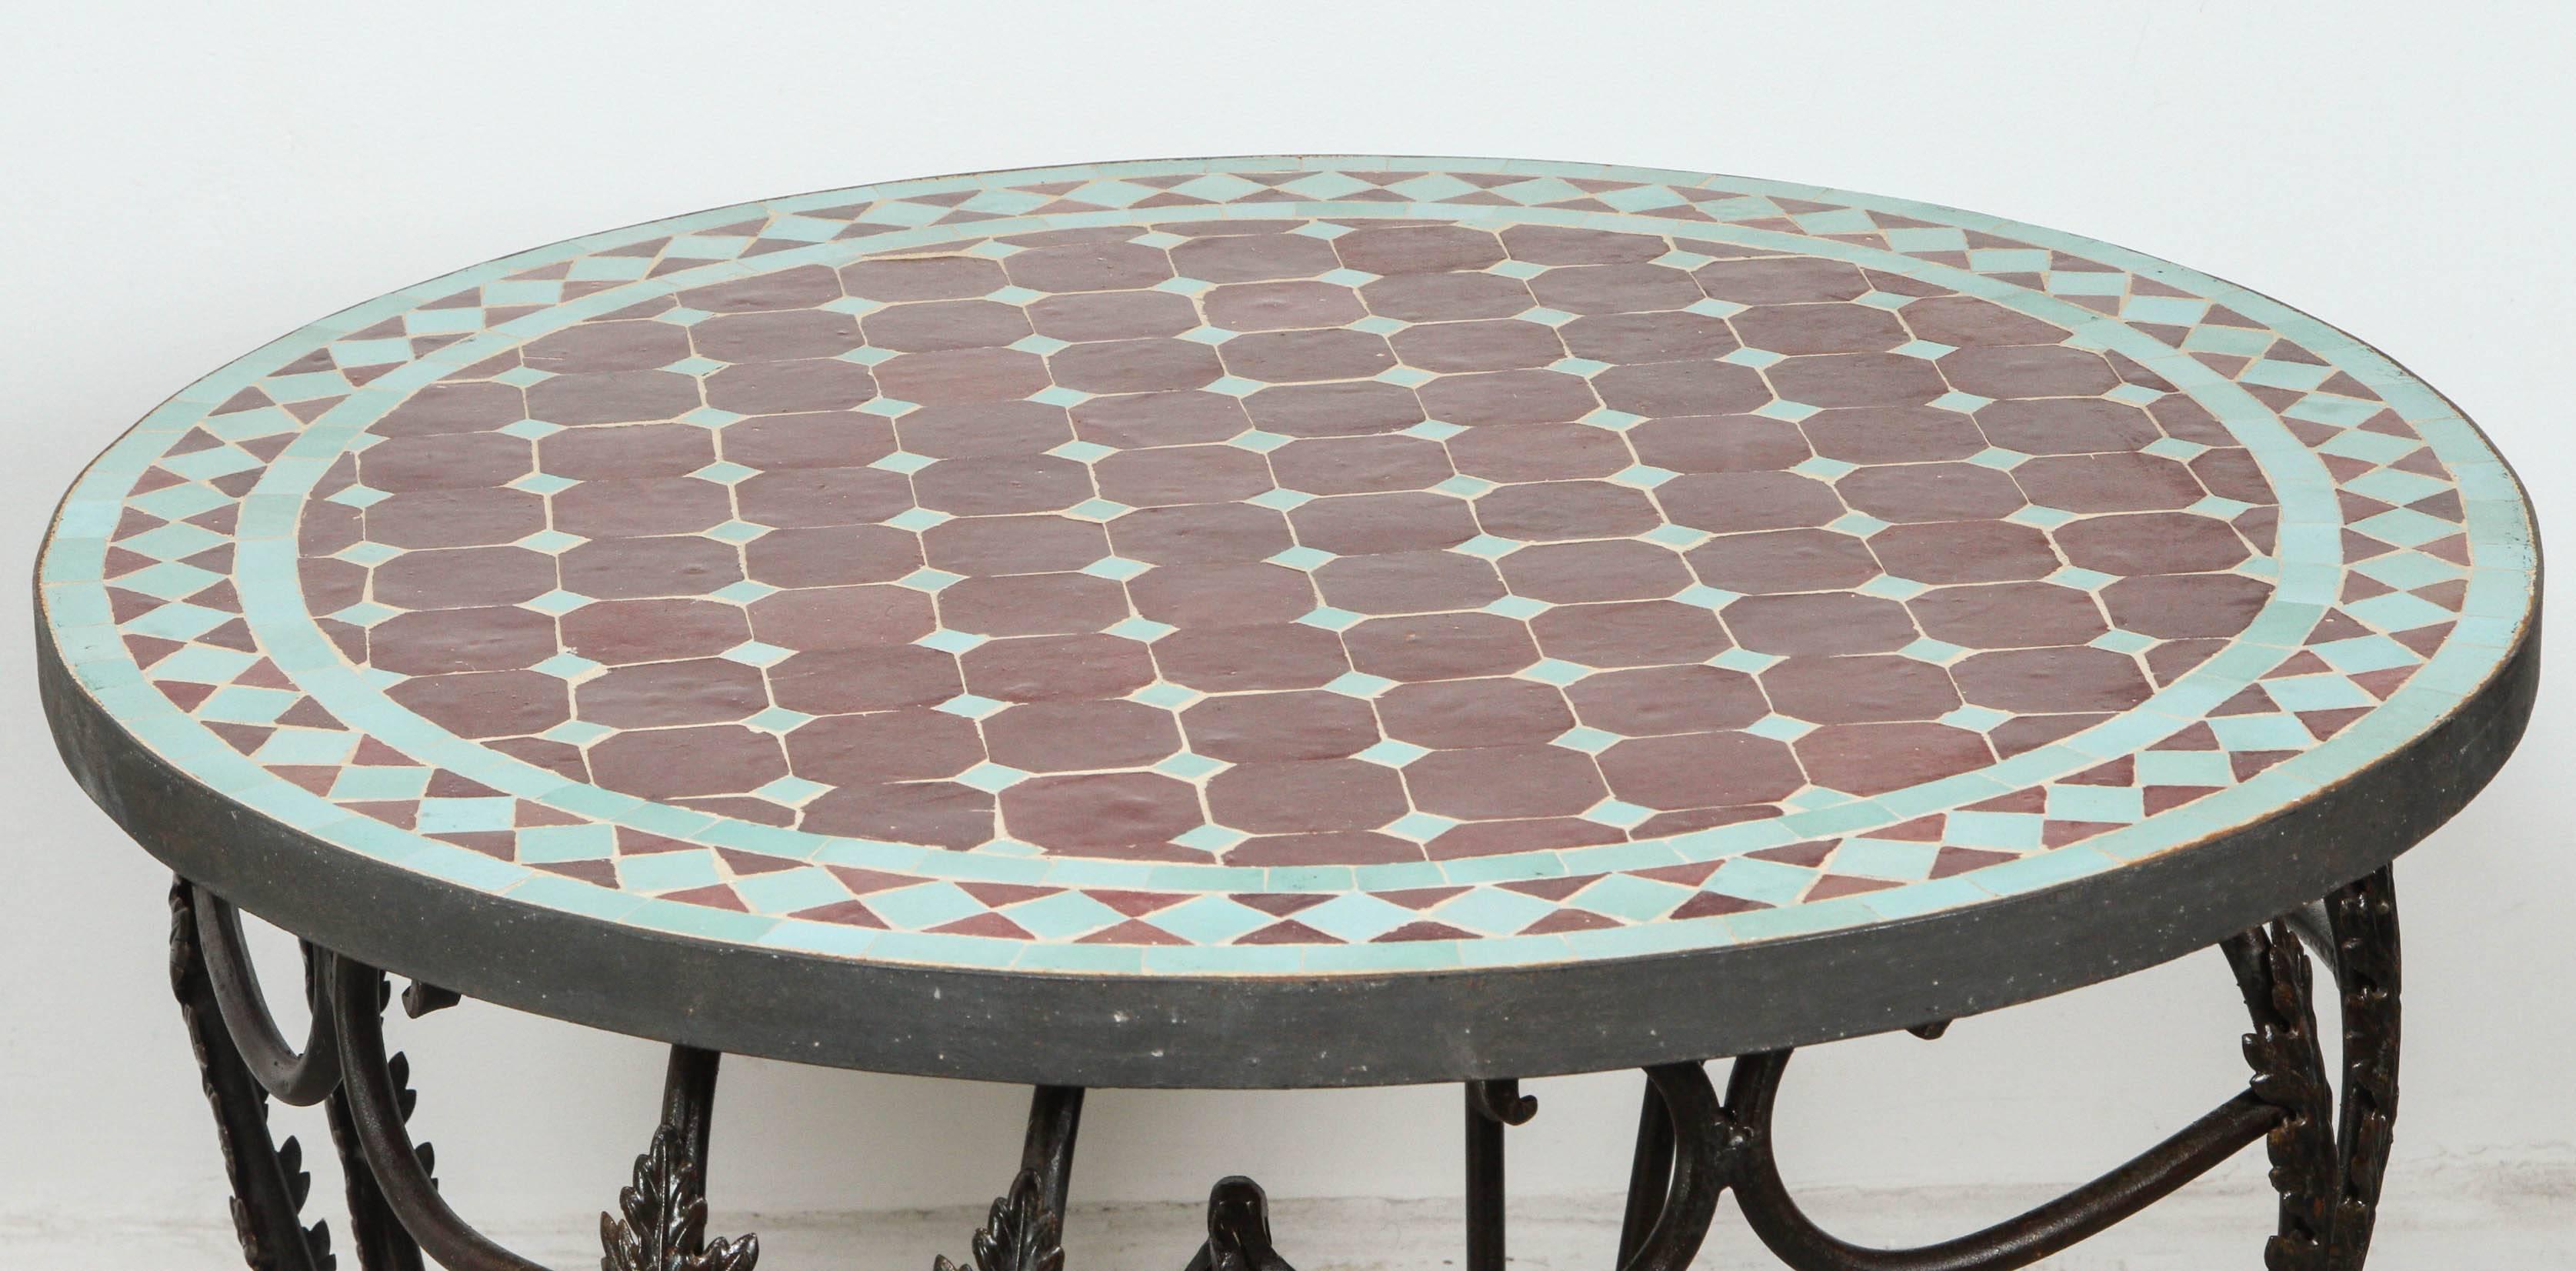 Moroccan round mosaic tile table on low iron base.
Green and burgundy tiles hand cut in geometrical designs.
Hand-made by expert artisans in Fez using reclaimed old glazed tiles and making beautiful geometrical designs, colors are aqua green and